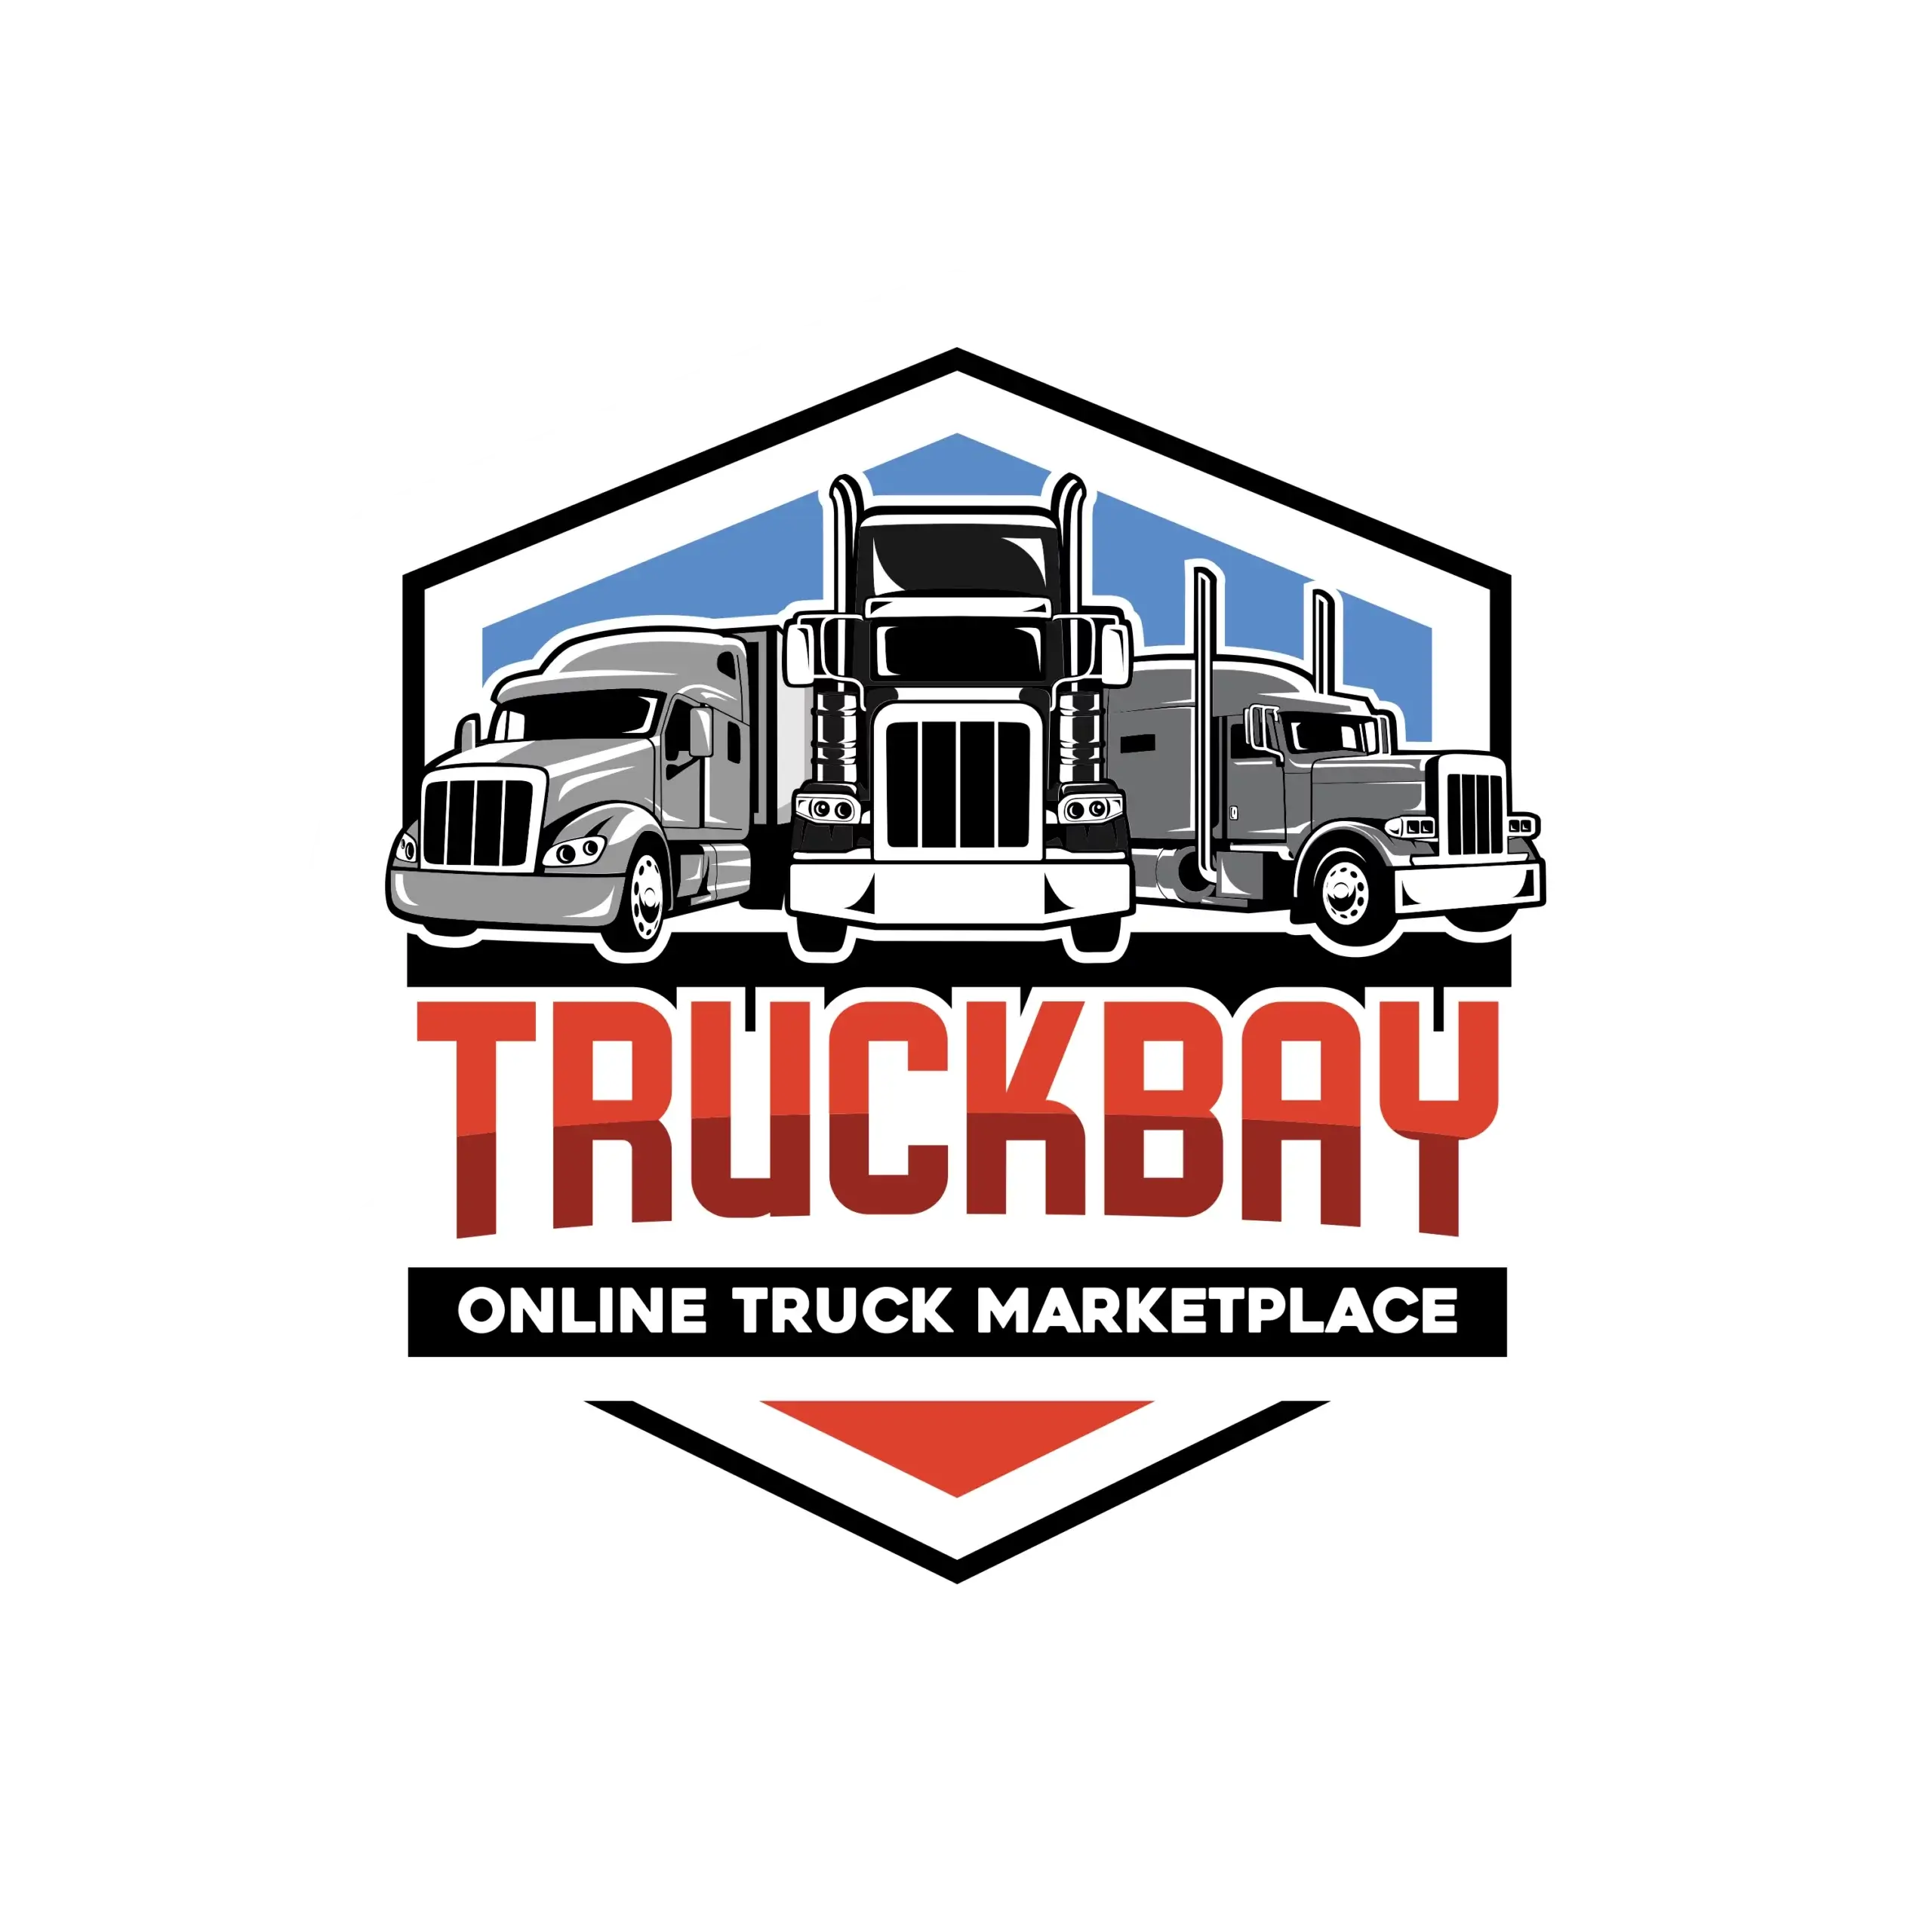 Heavy Truck Recycling and Dismantling - Truckbay